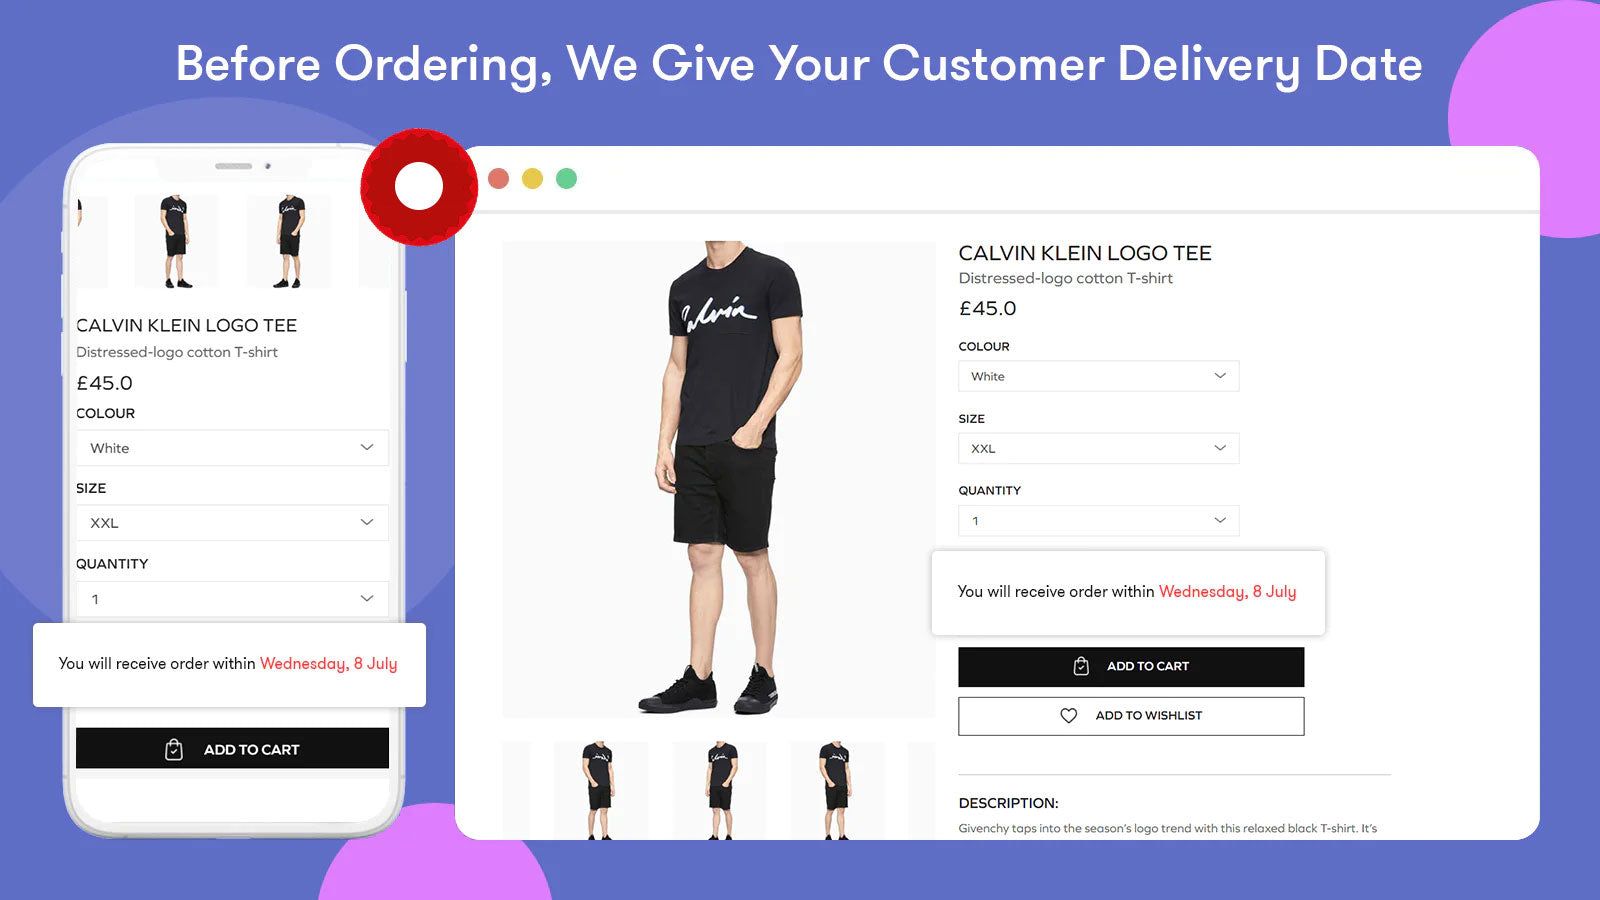 Before ordering, We give your customer delivery date 